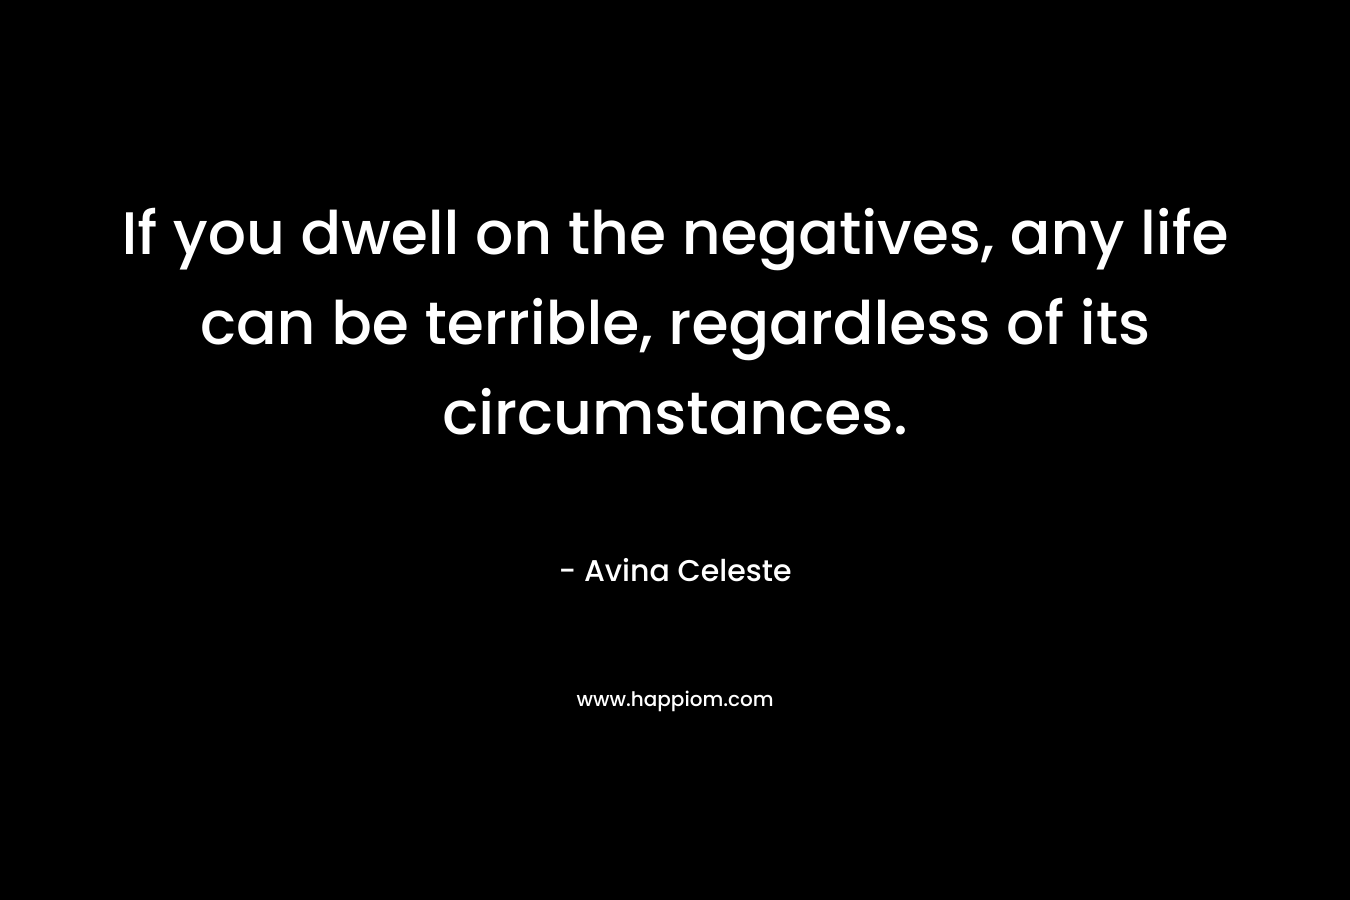 If you dwell on the negatives, any life can be terrible, regardless of its circumstances. – Avina Celeste